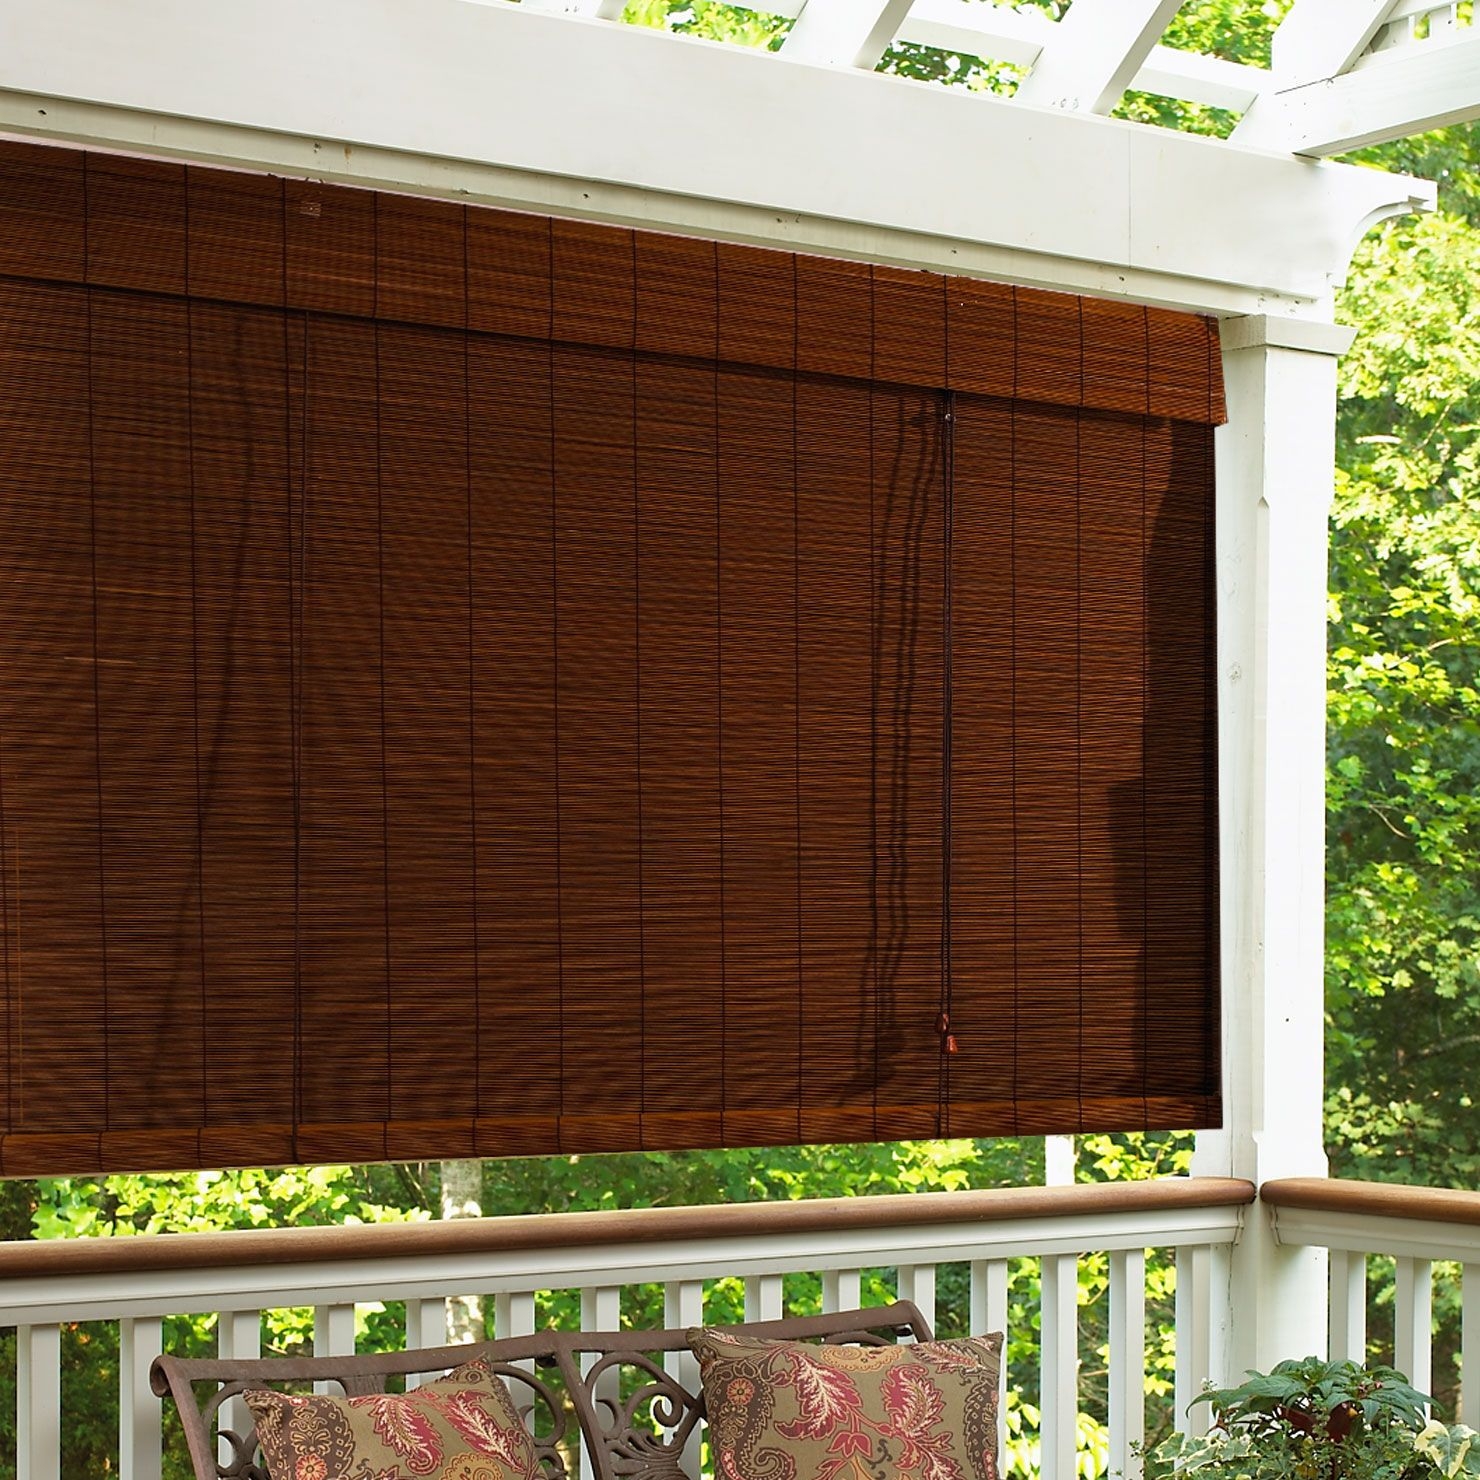 CMJM Bamboo Blinds， Bamboo Outdoor Shades for Patio Roll-up Reed Shade Natural for Courtyard Garden Breathable/Sunshade